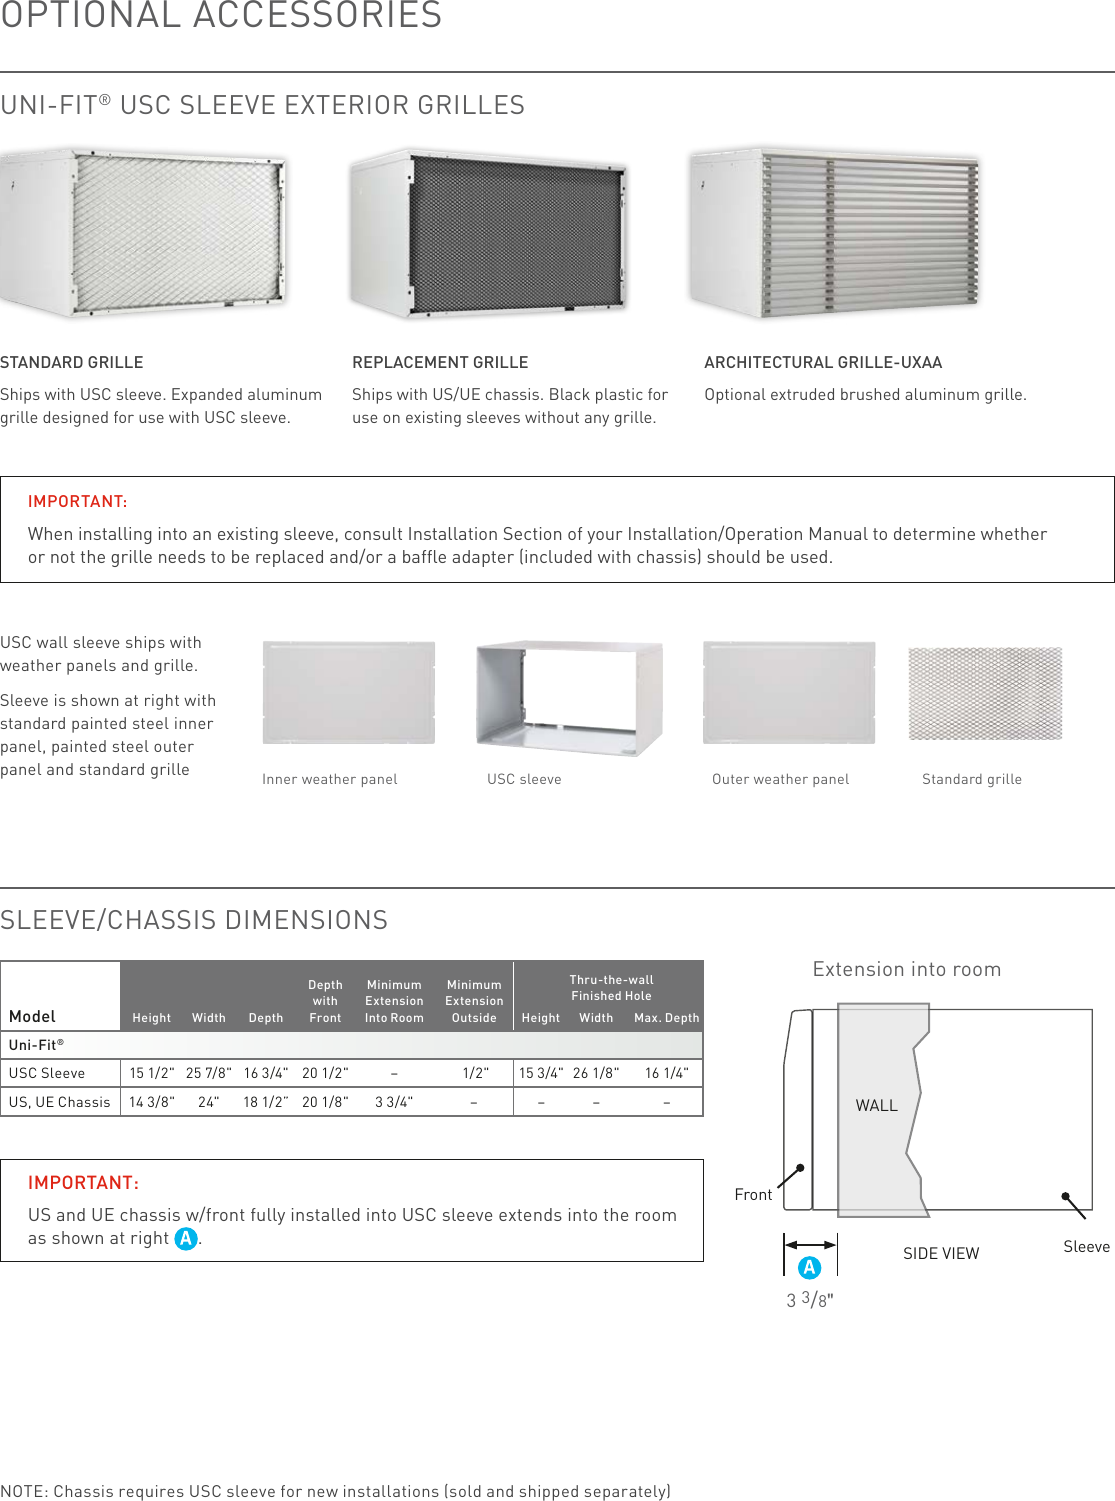 Page 3 of 4 - Friedrich  2018 Uni-fit Thru-the-wall Air Conditioners Brochure